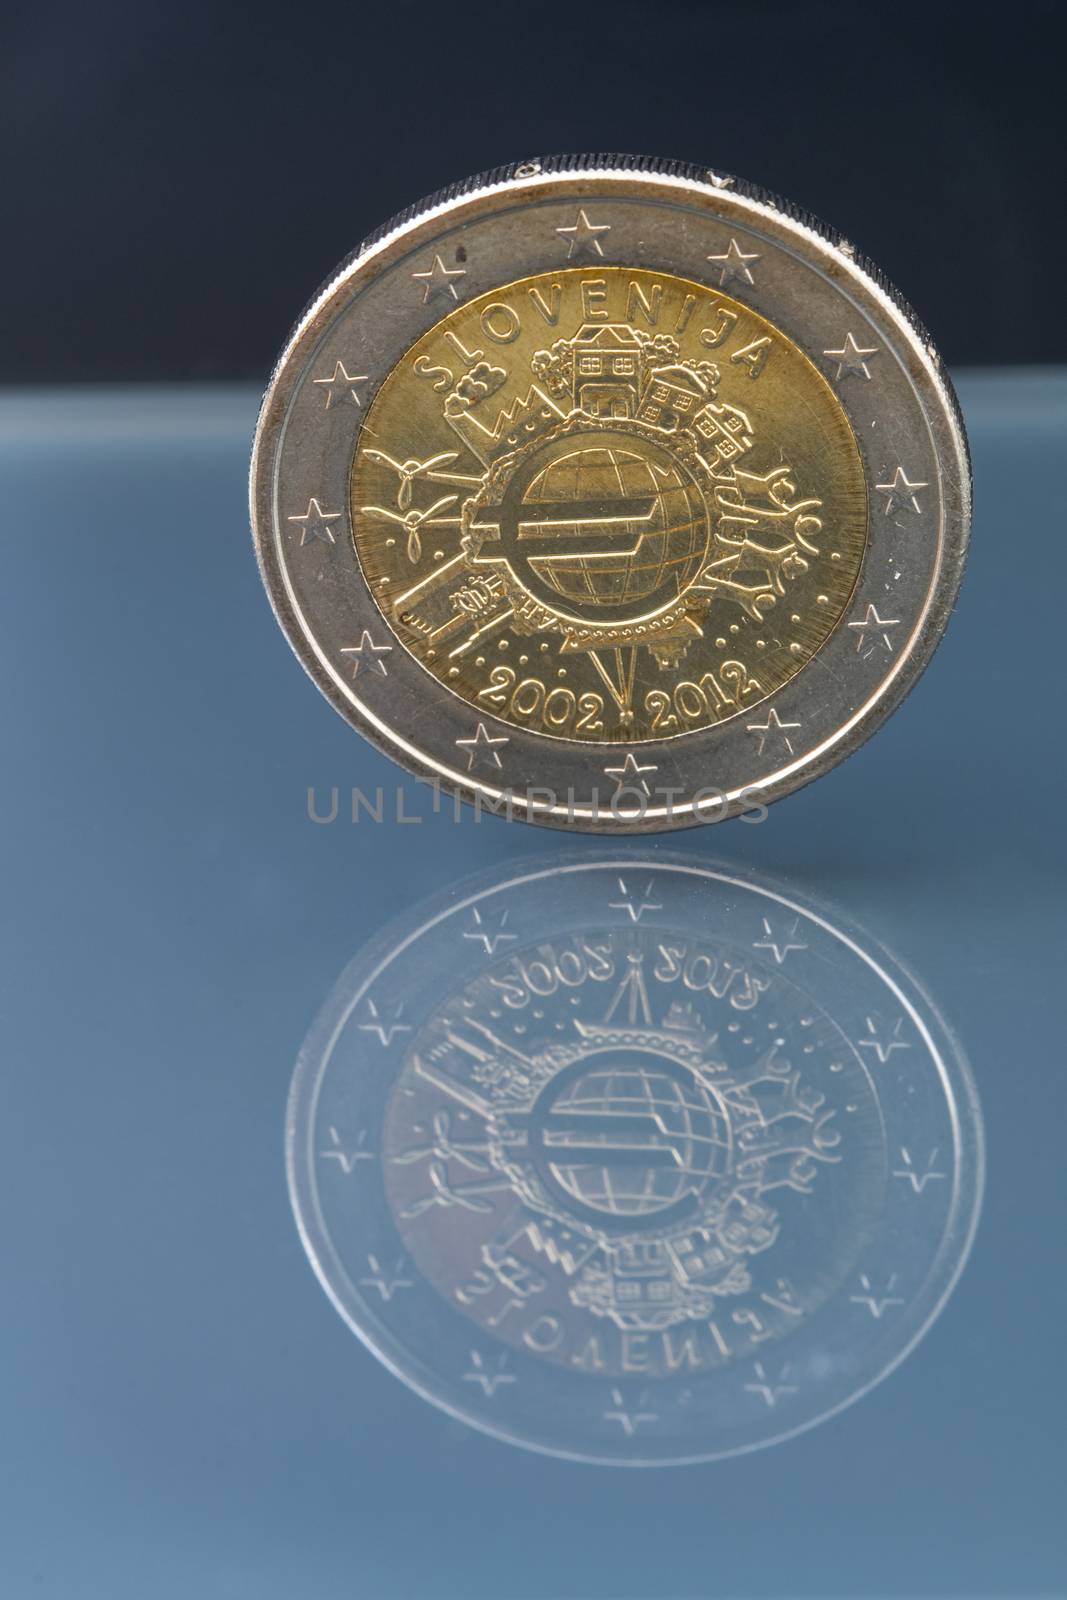 Commemorative 2 EUR coin issued to celebrate the 10th anniversary of Euro as currency, coin issued by Slovenia